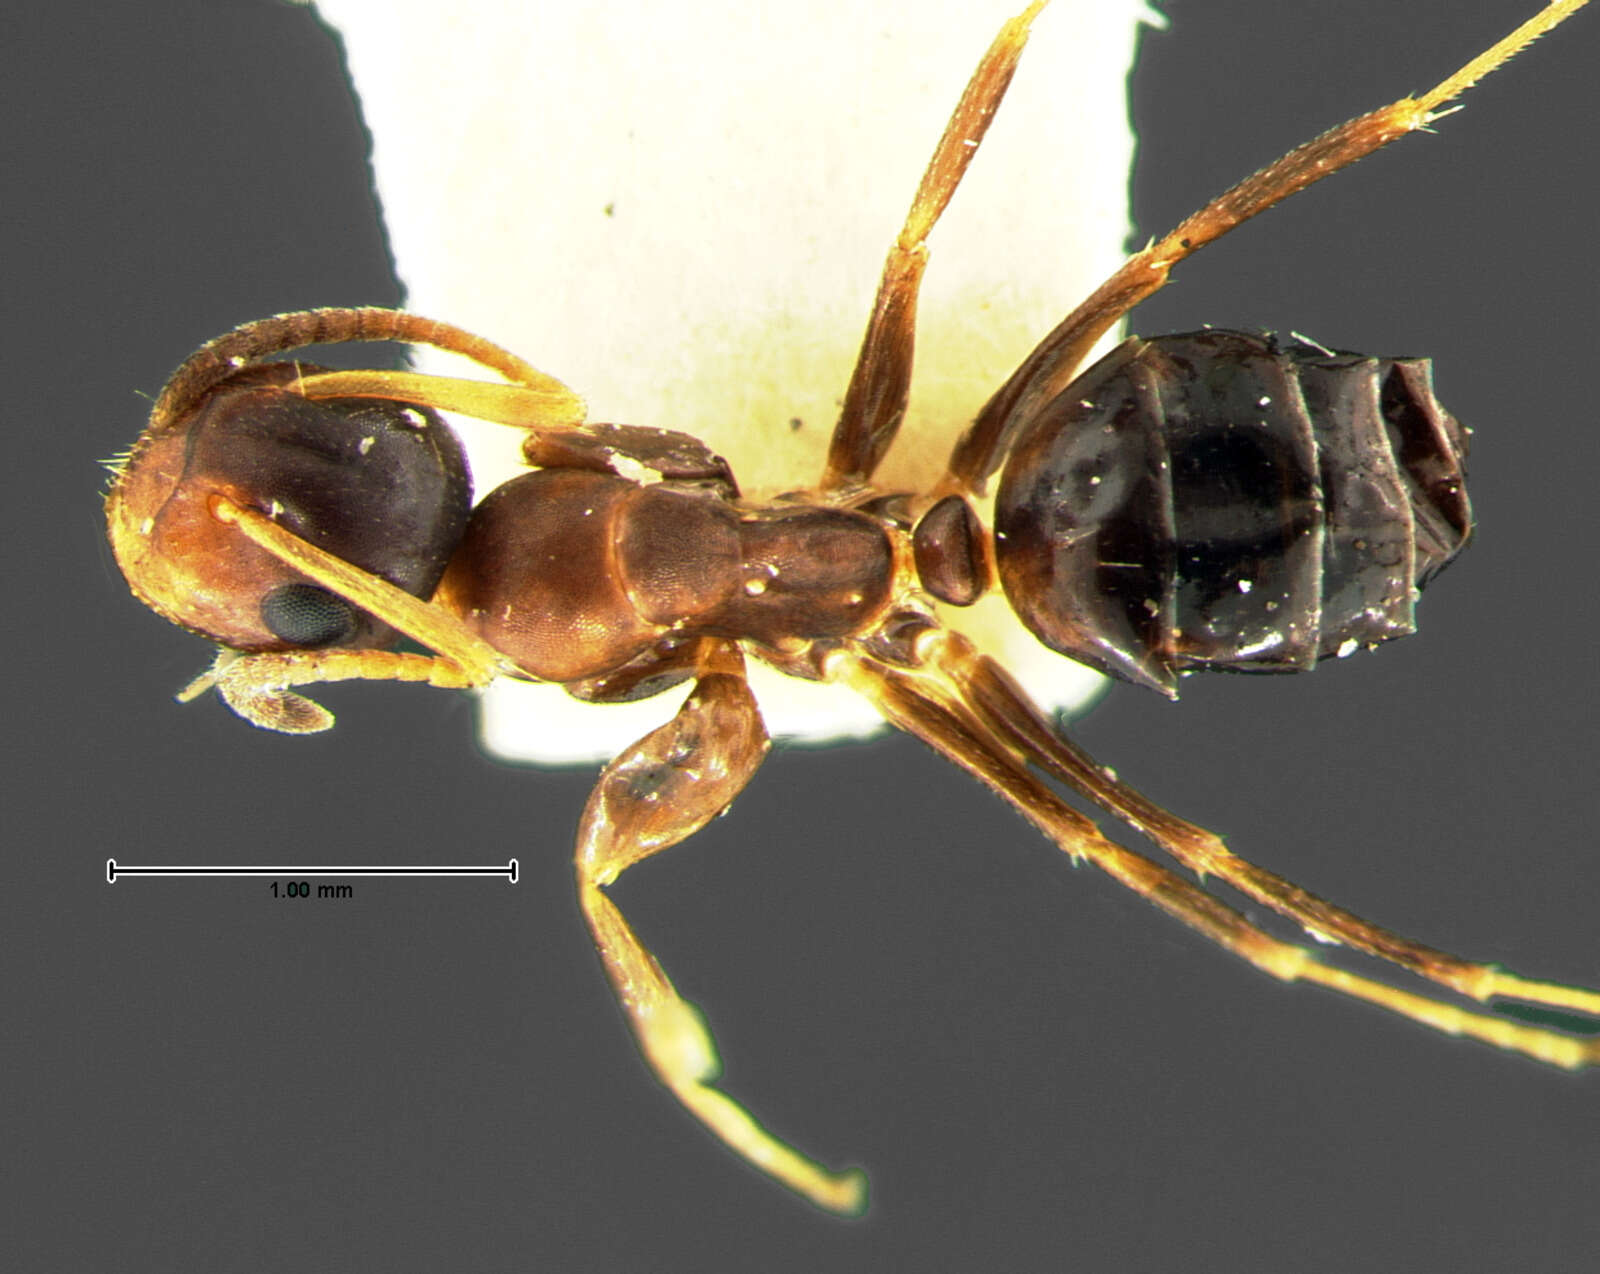 Image of Colobopsis mississippiensis